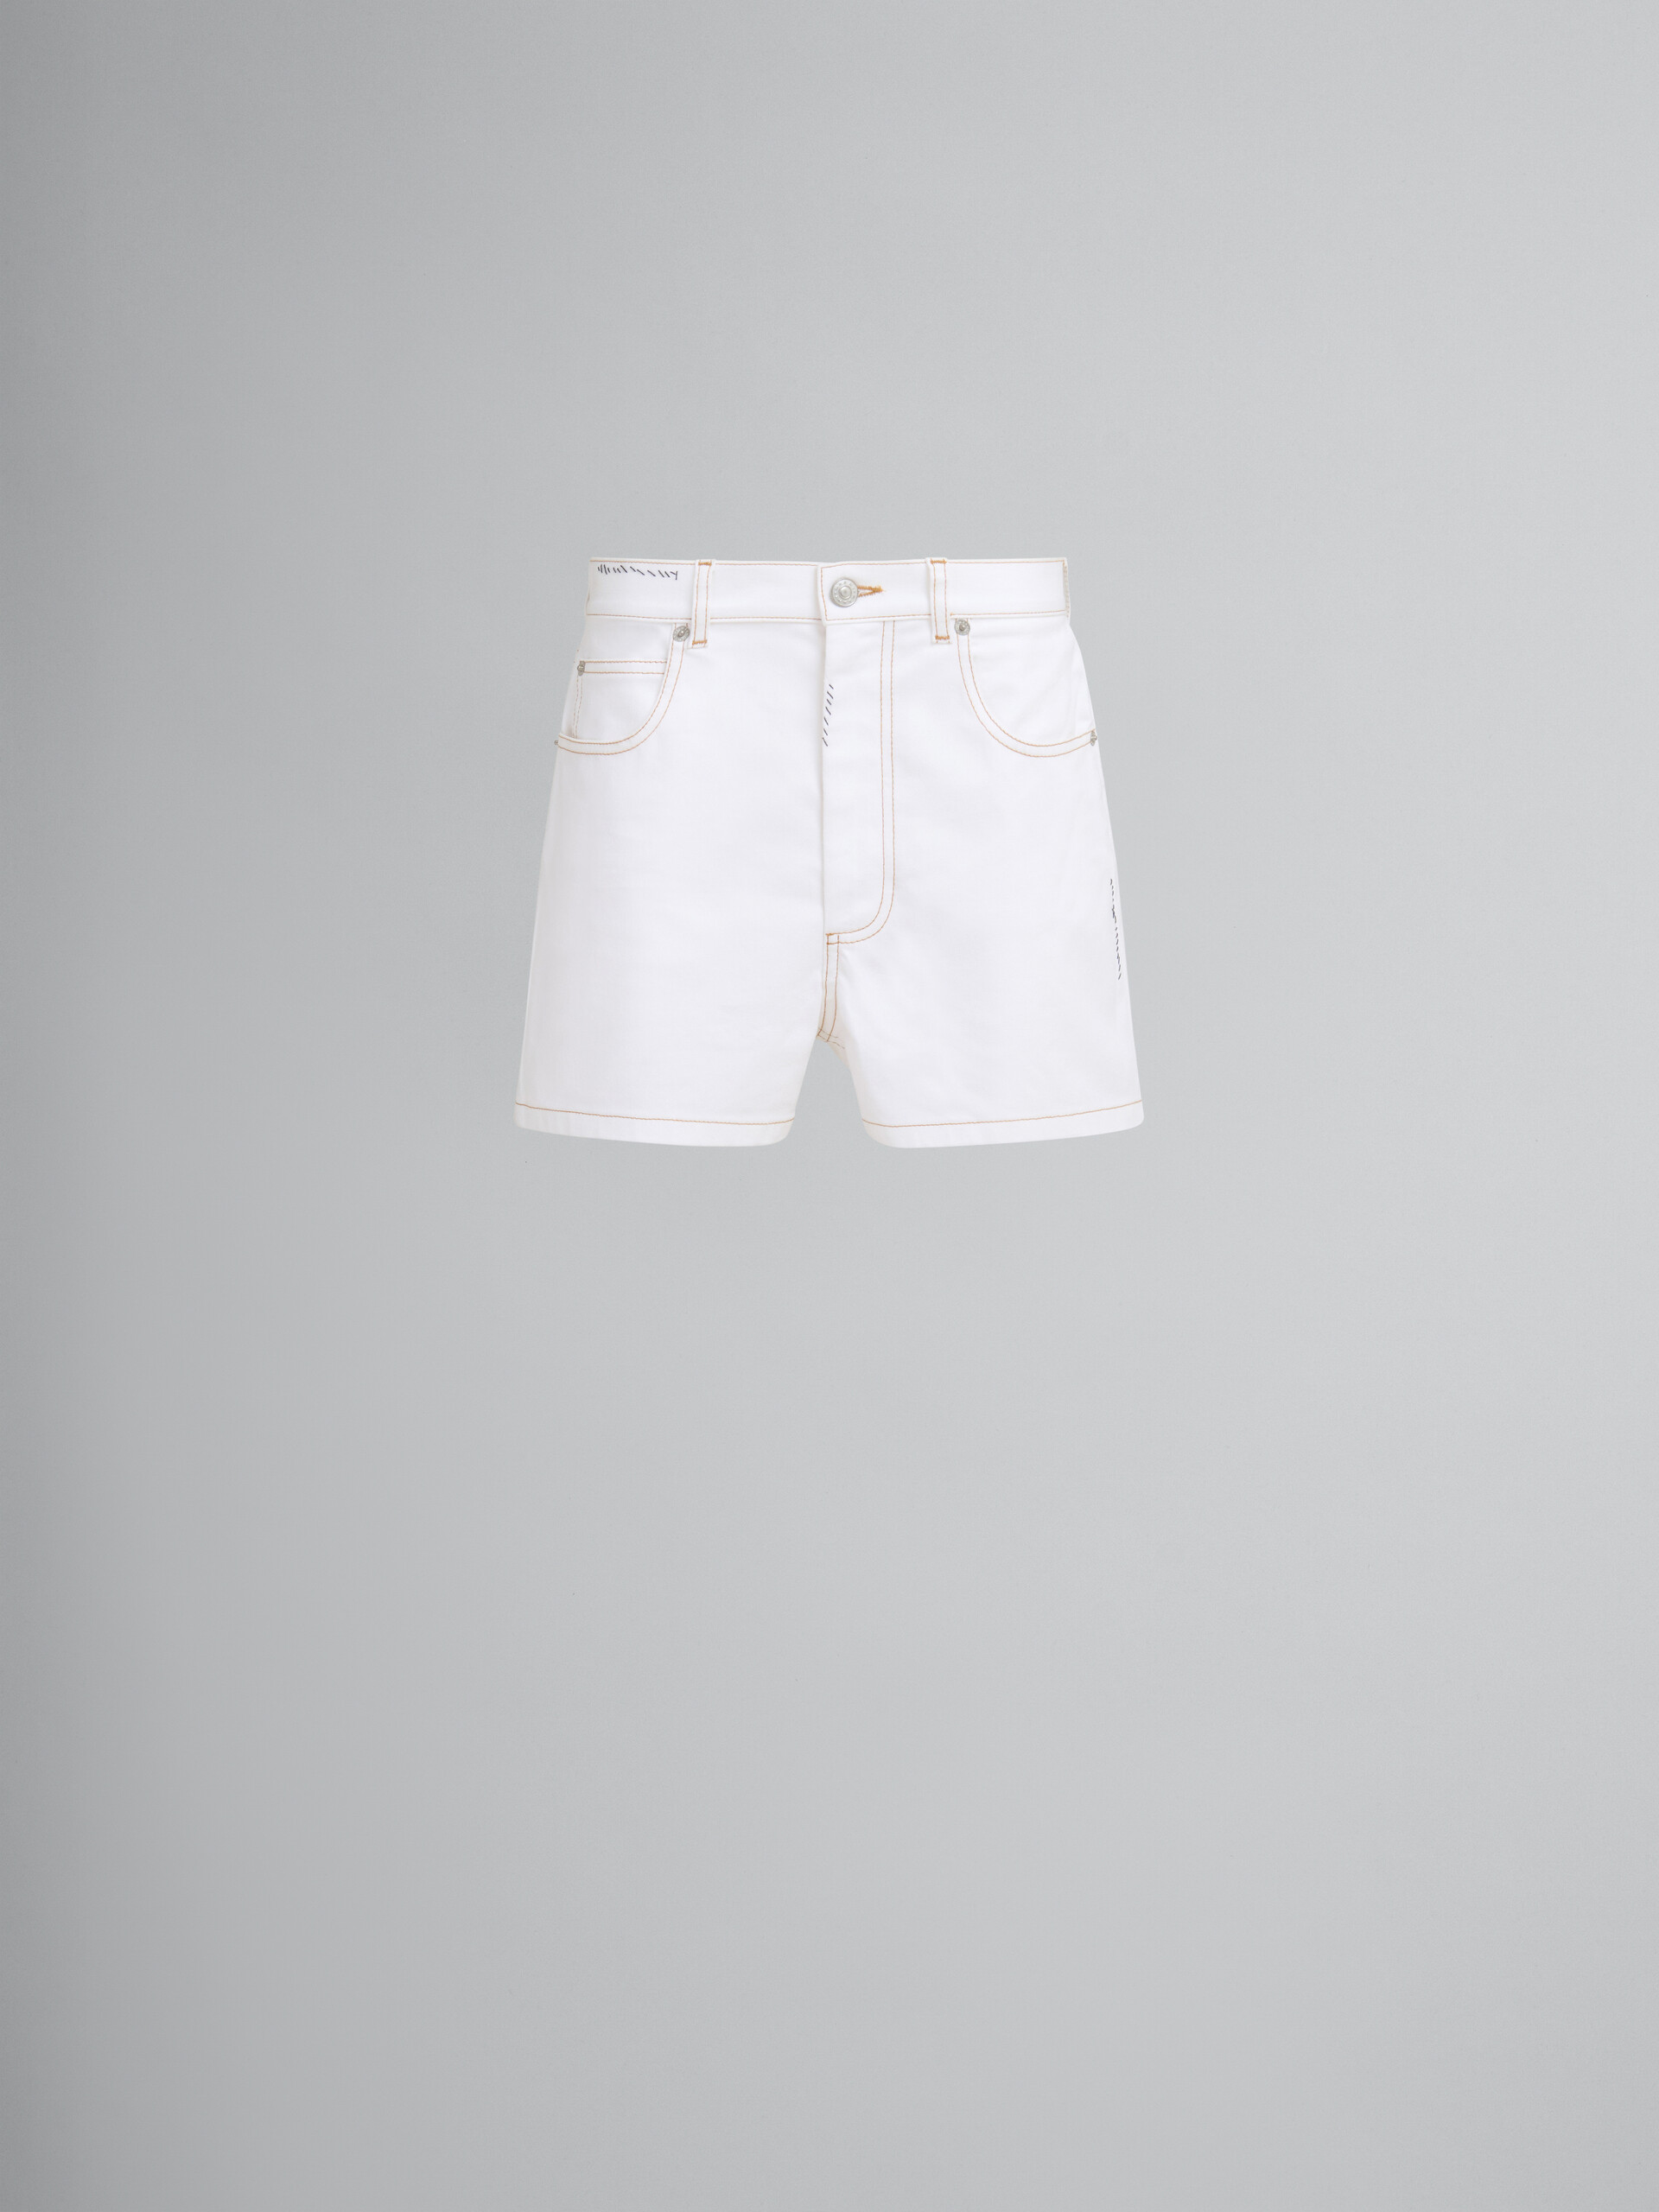 White denim shorts with flower patch - Pants - Image 1